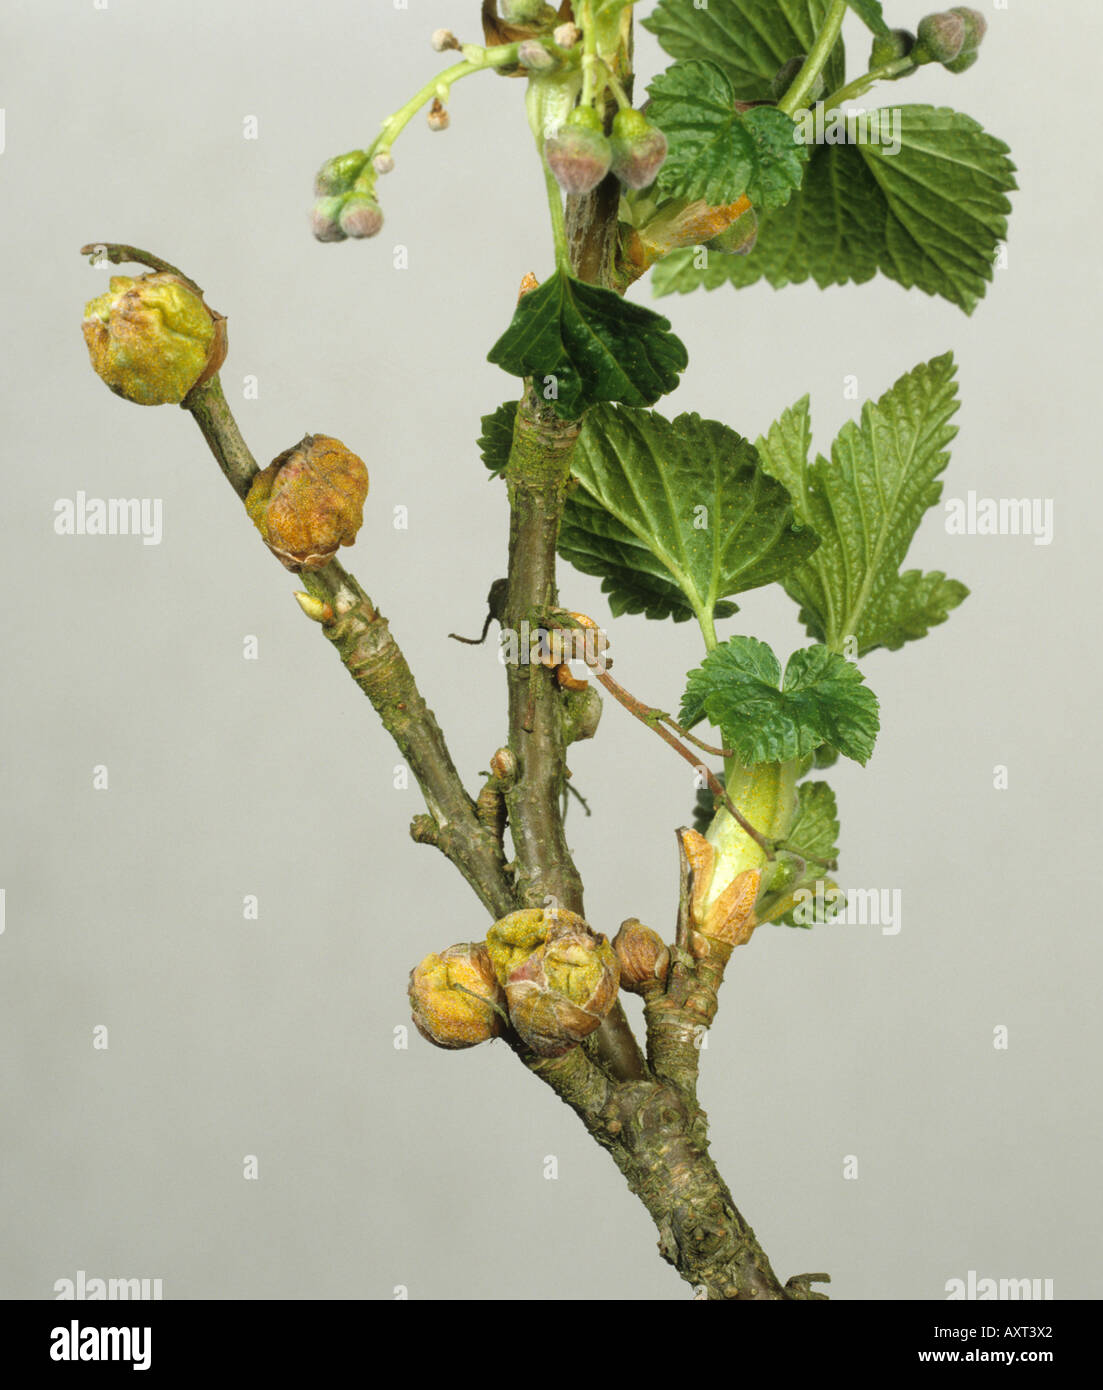 Blackcurrant gall mite Cecidophyopsis ribis big bud damage to young blackcurrant leaves Stock Photo